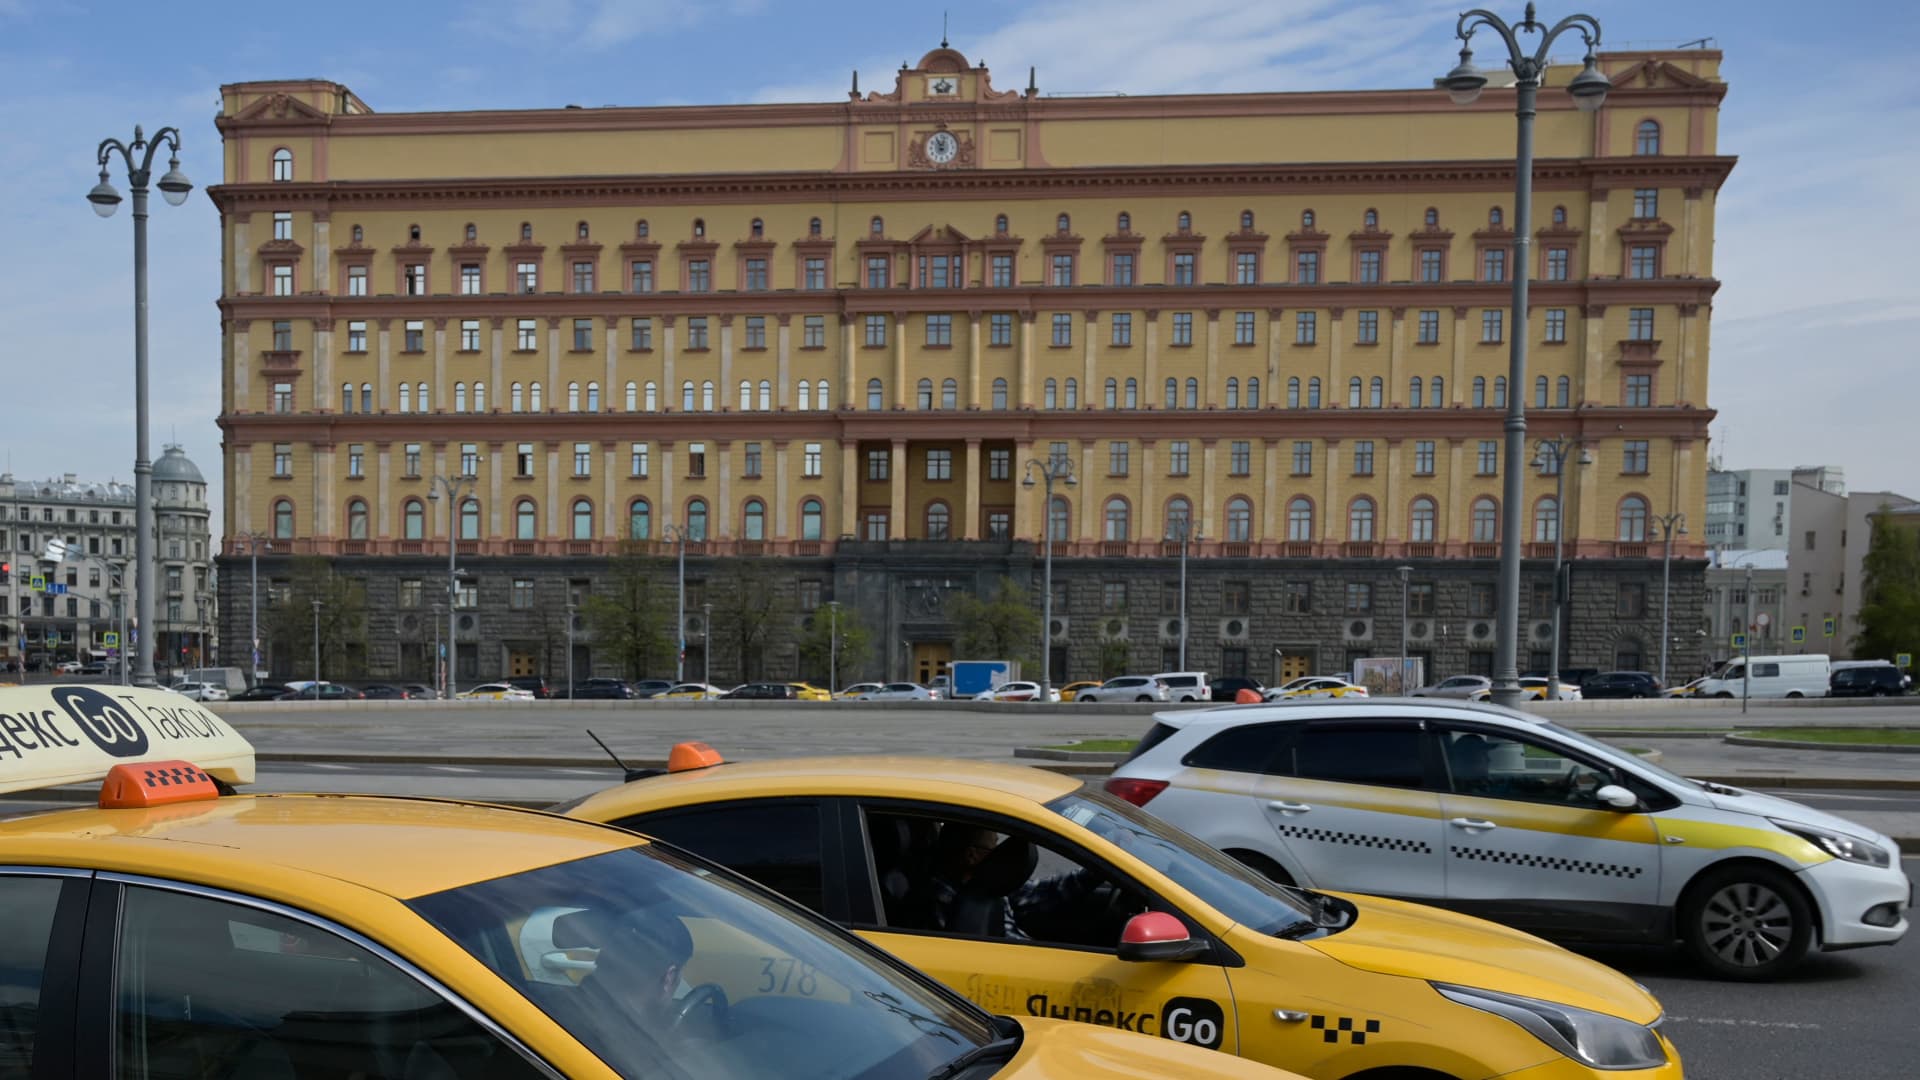 Taxis move past the headquarters of Russia's Federal Security Services (FSB) in central Moscow on May 12, 2022.